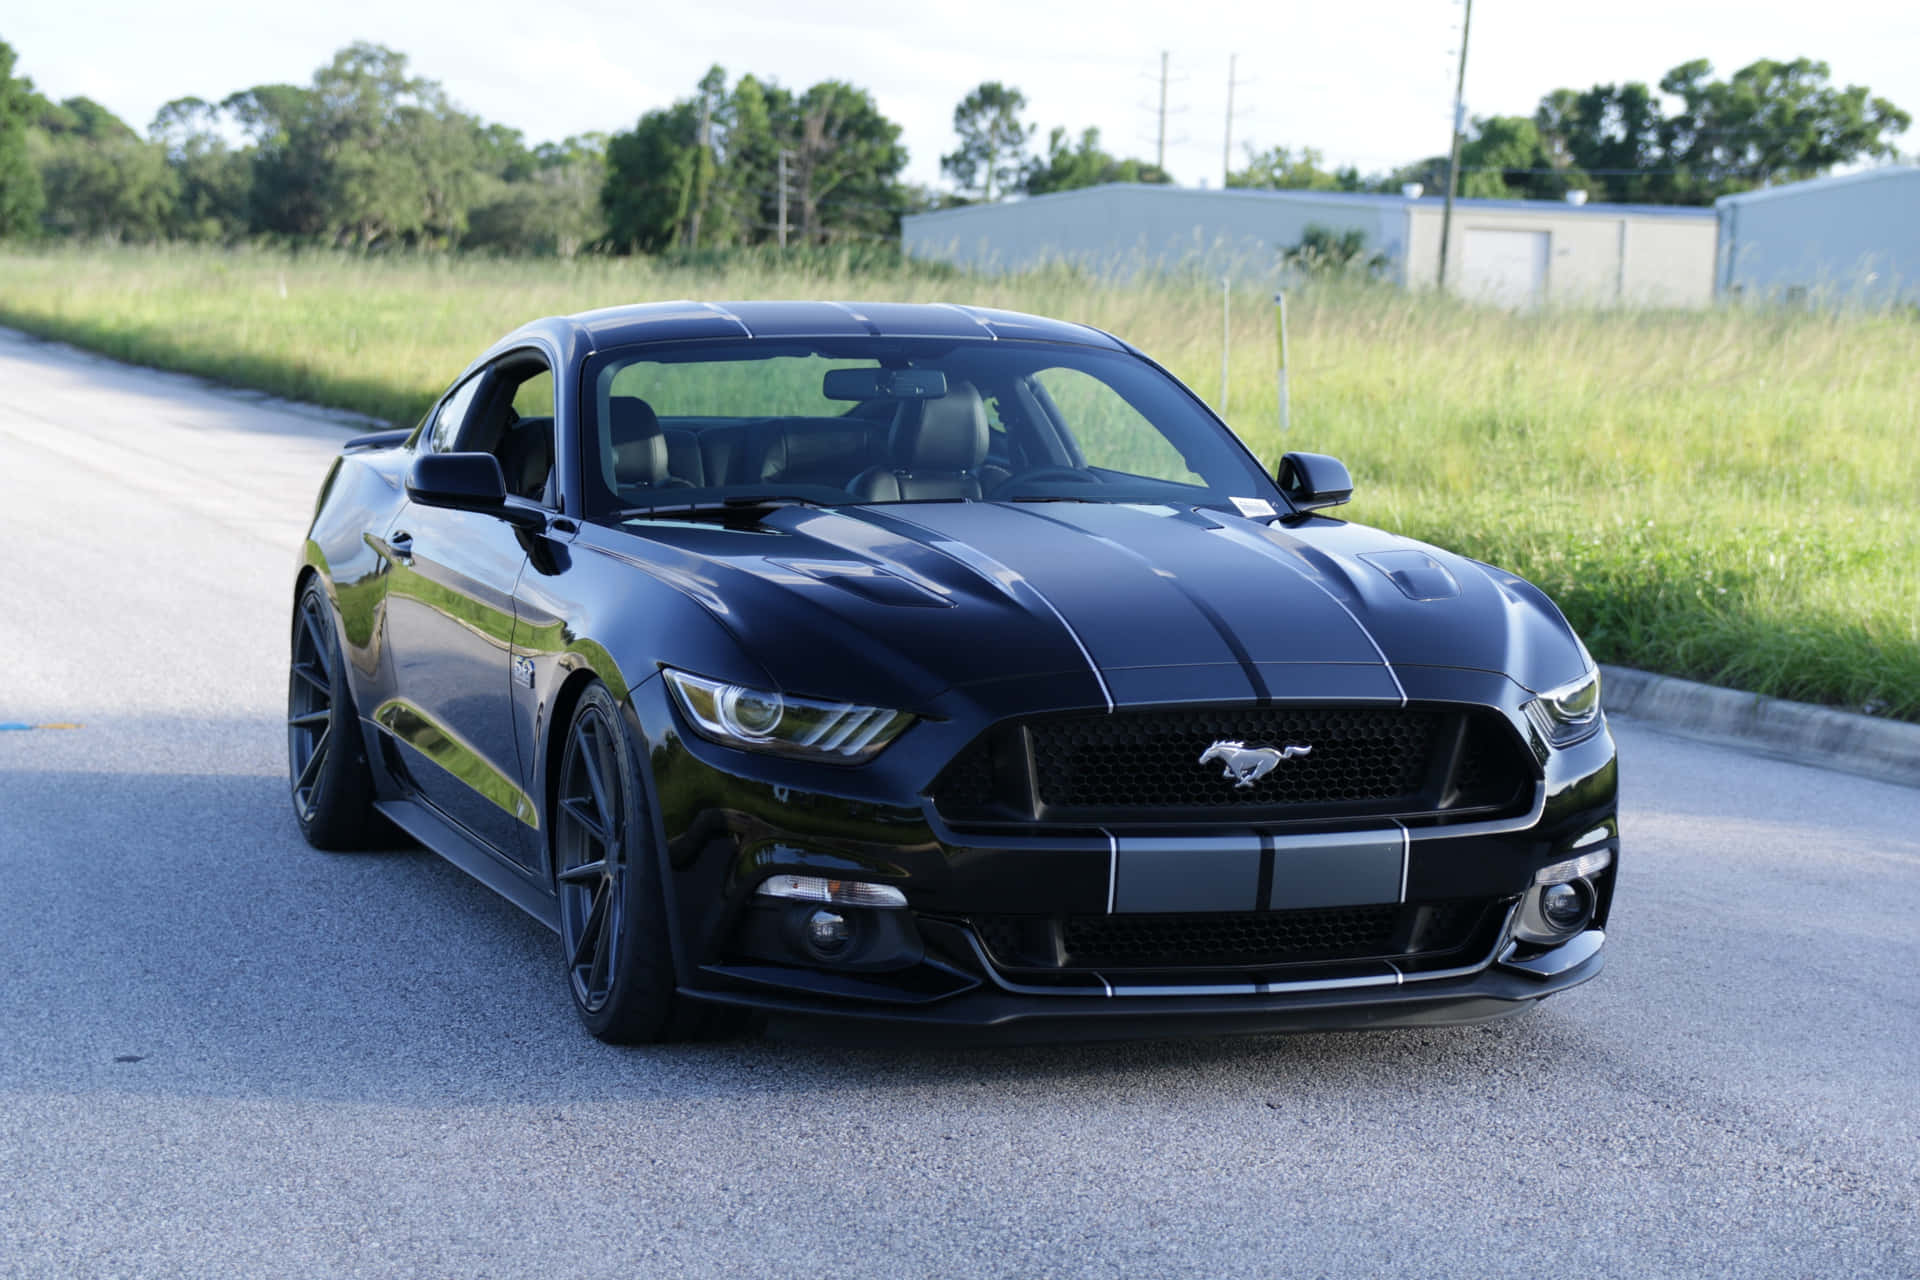 A Black Ford Mustang Is Driving Down The Road